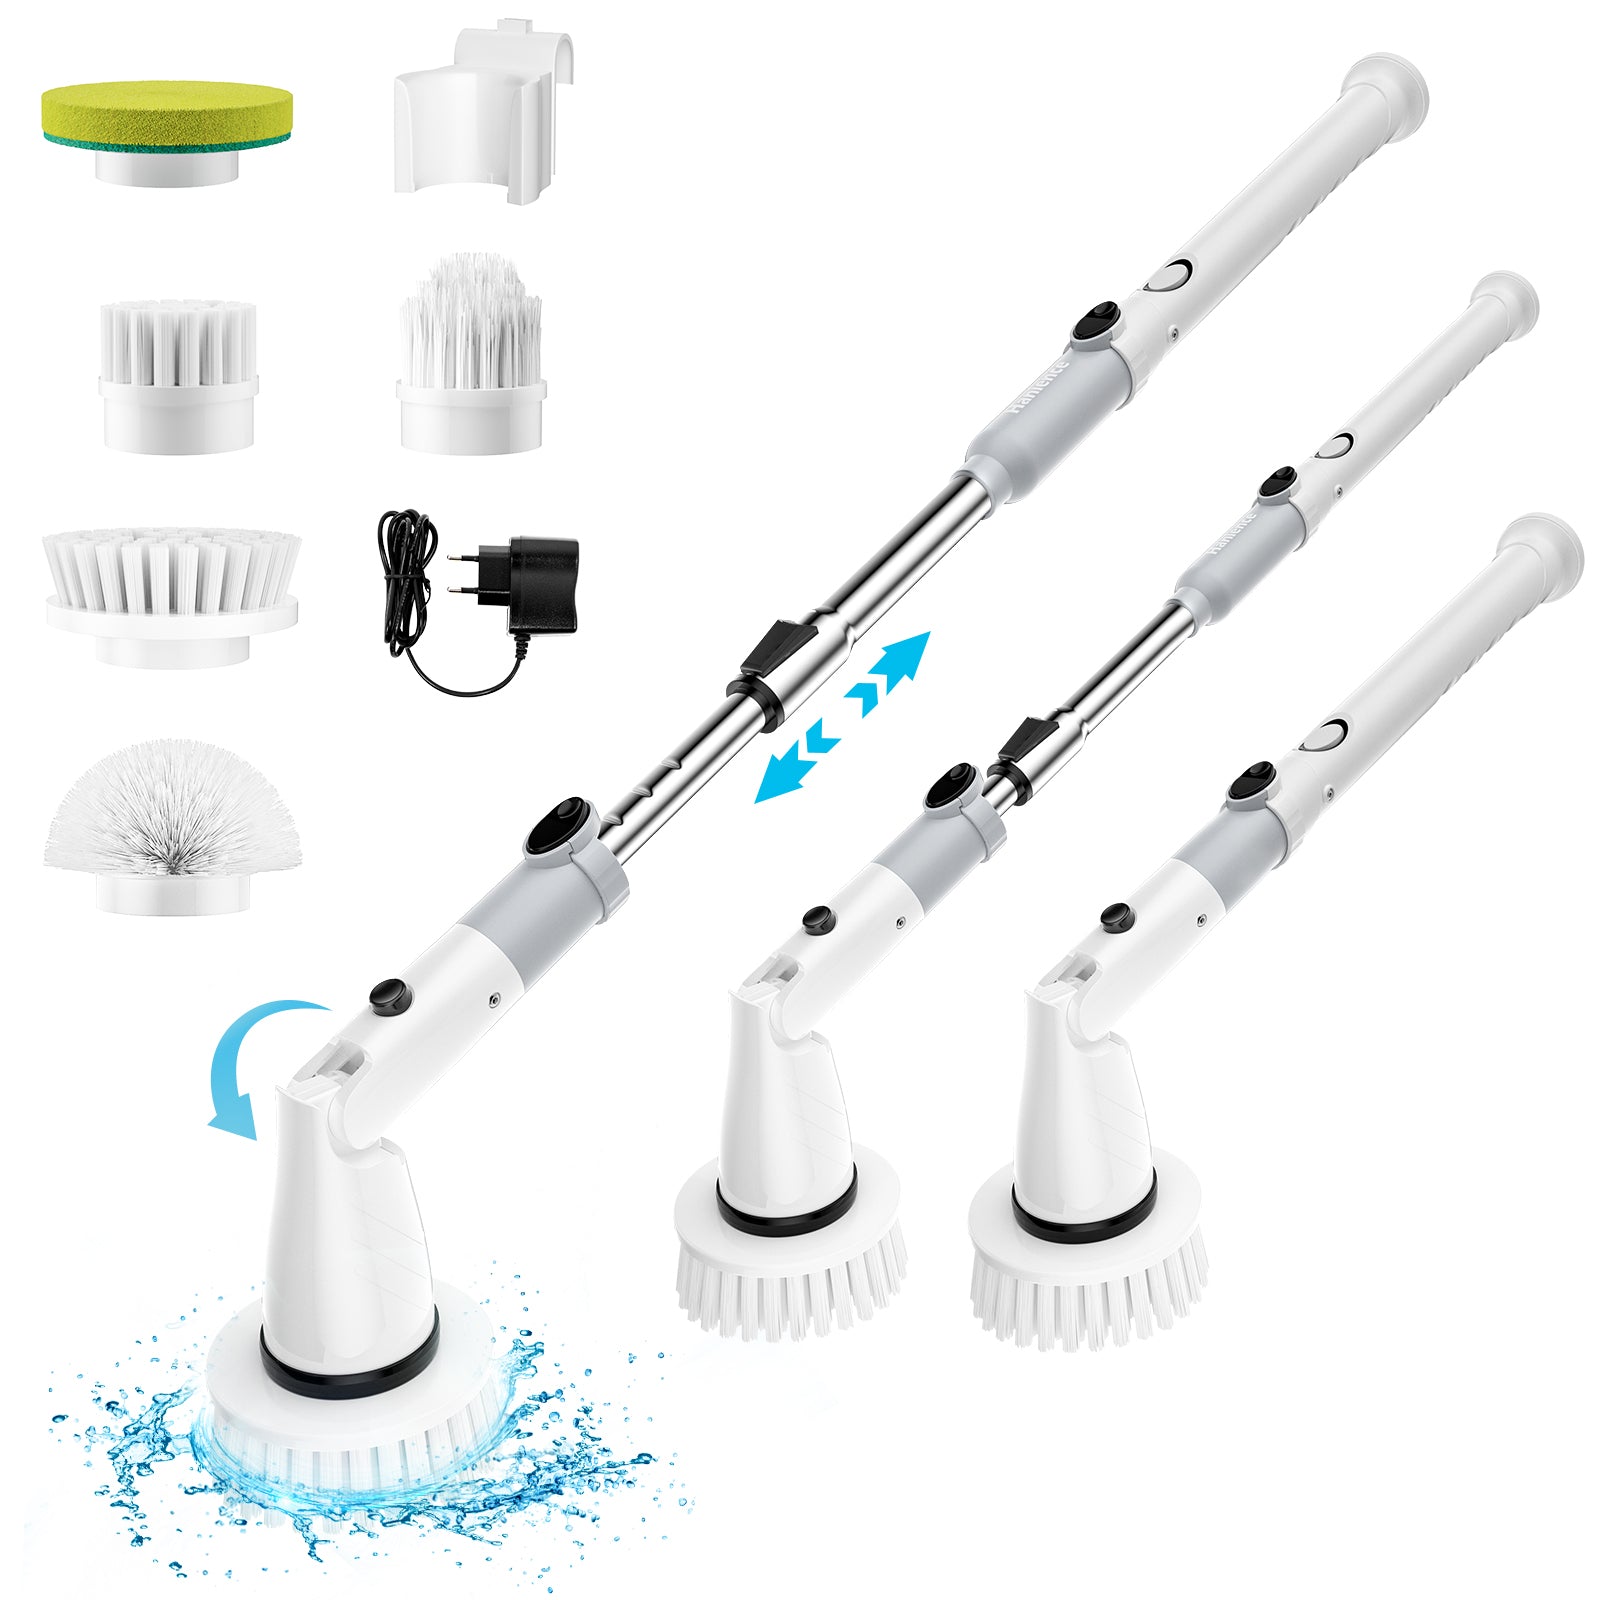 5-in-1 Electric Spin Scrubber Cordless Cleaning Brushes Rotating